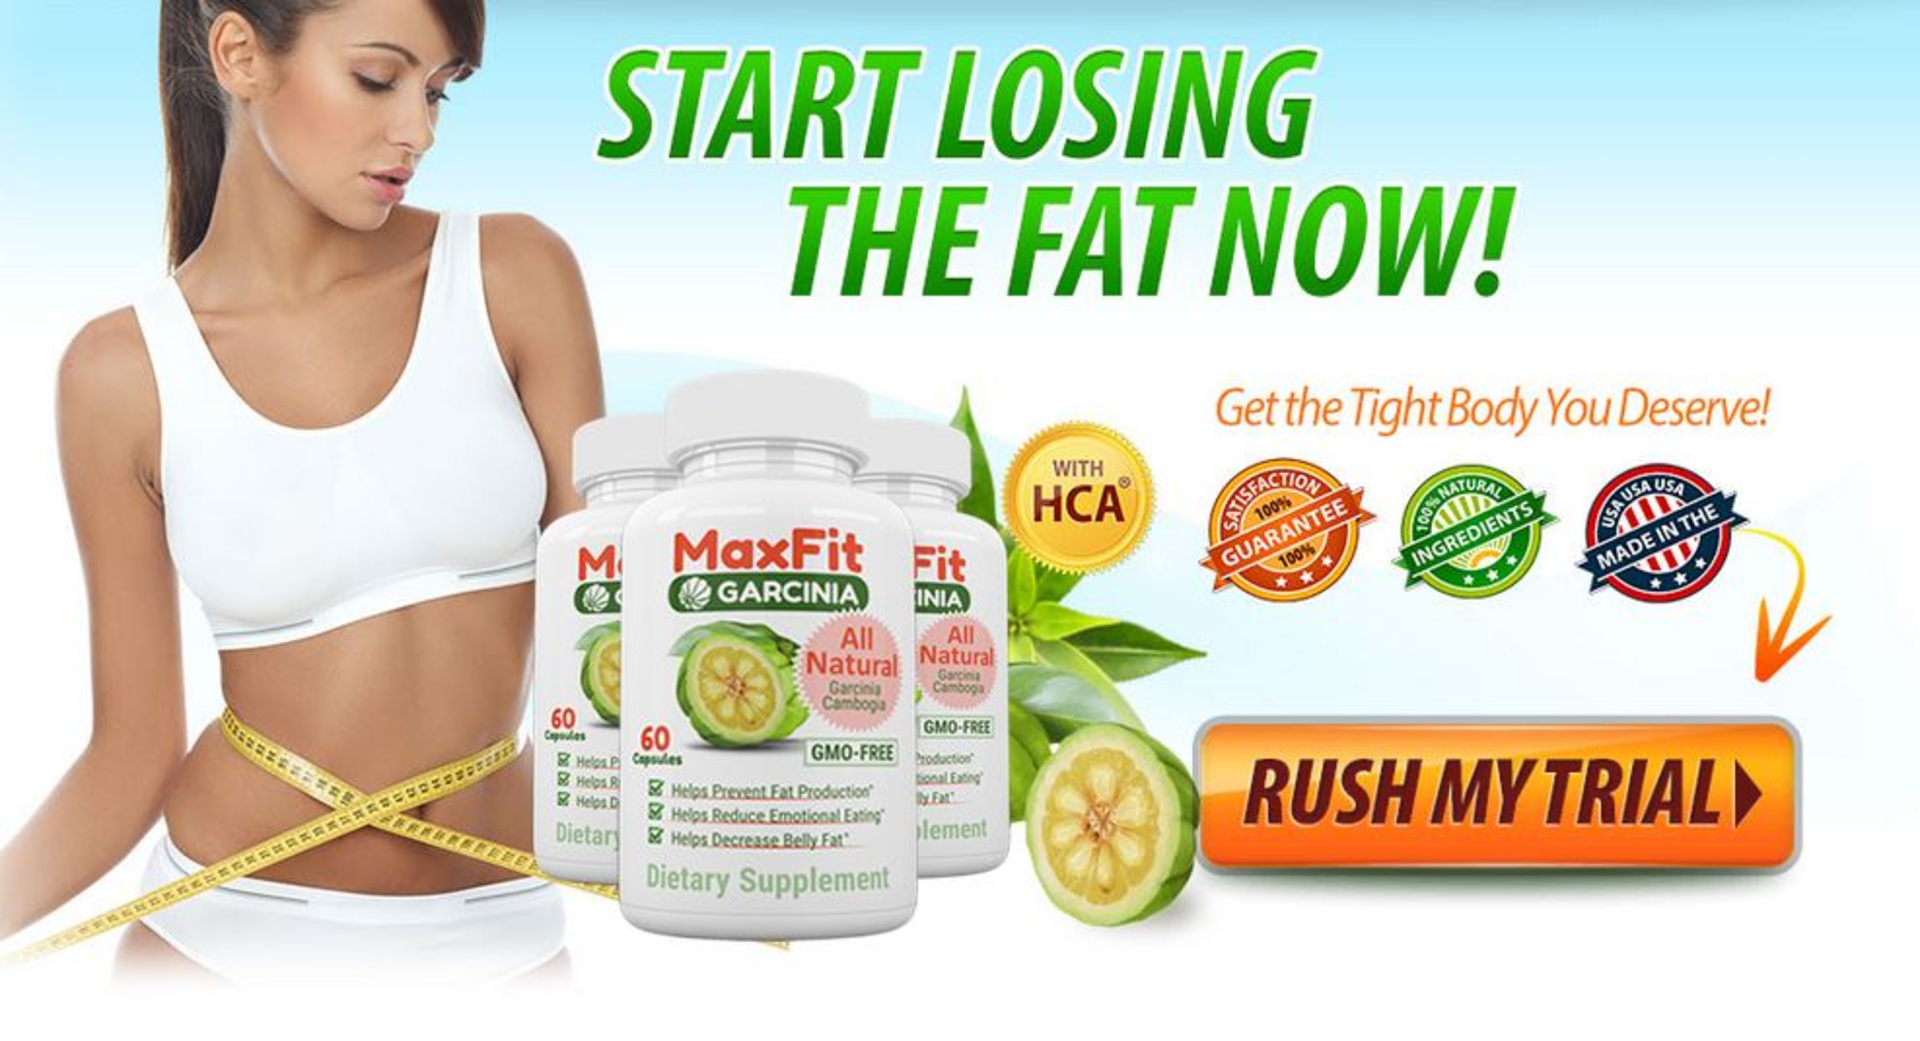 4 Top Questions That Are Commonly Asked About the Maxfit Garcinia image